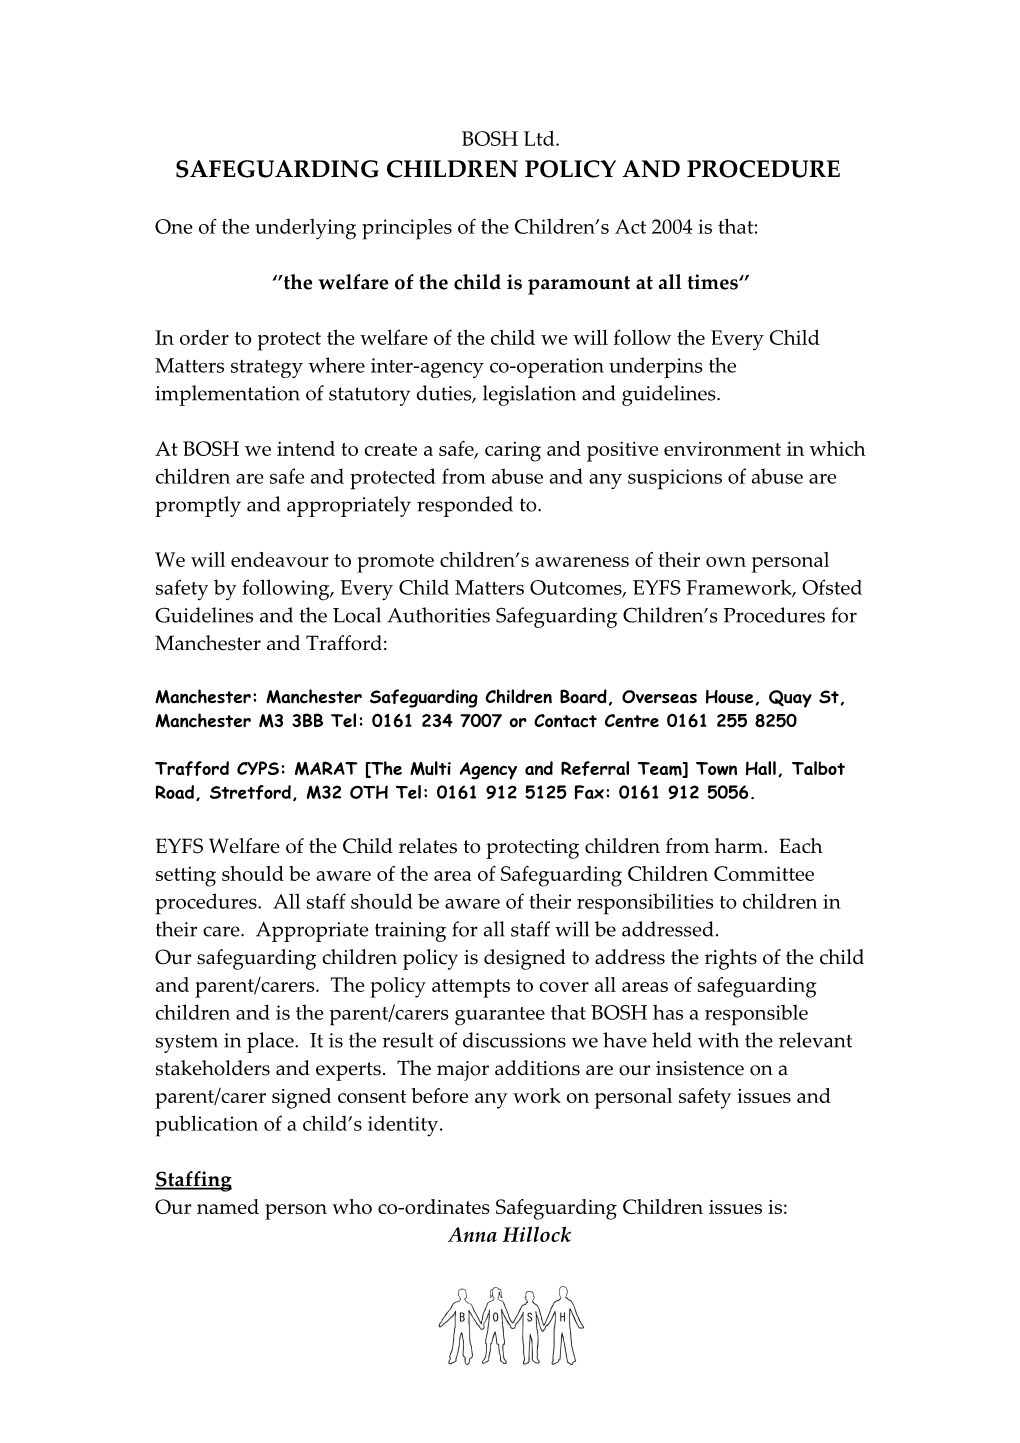 Safeguarding Children Policy and Procedure